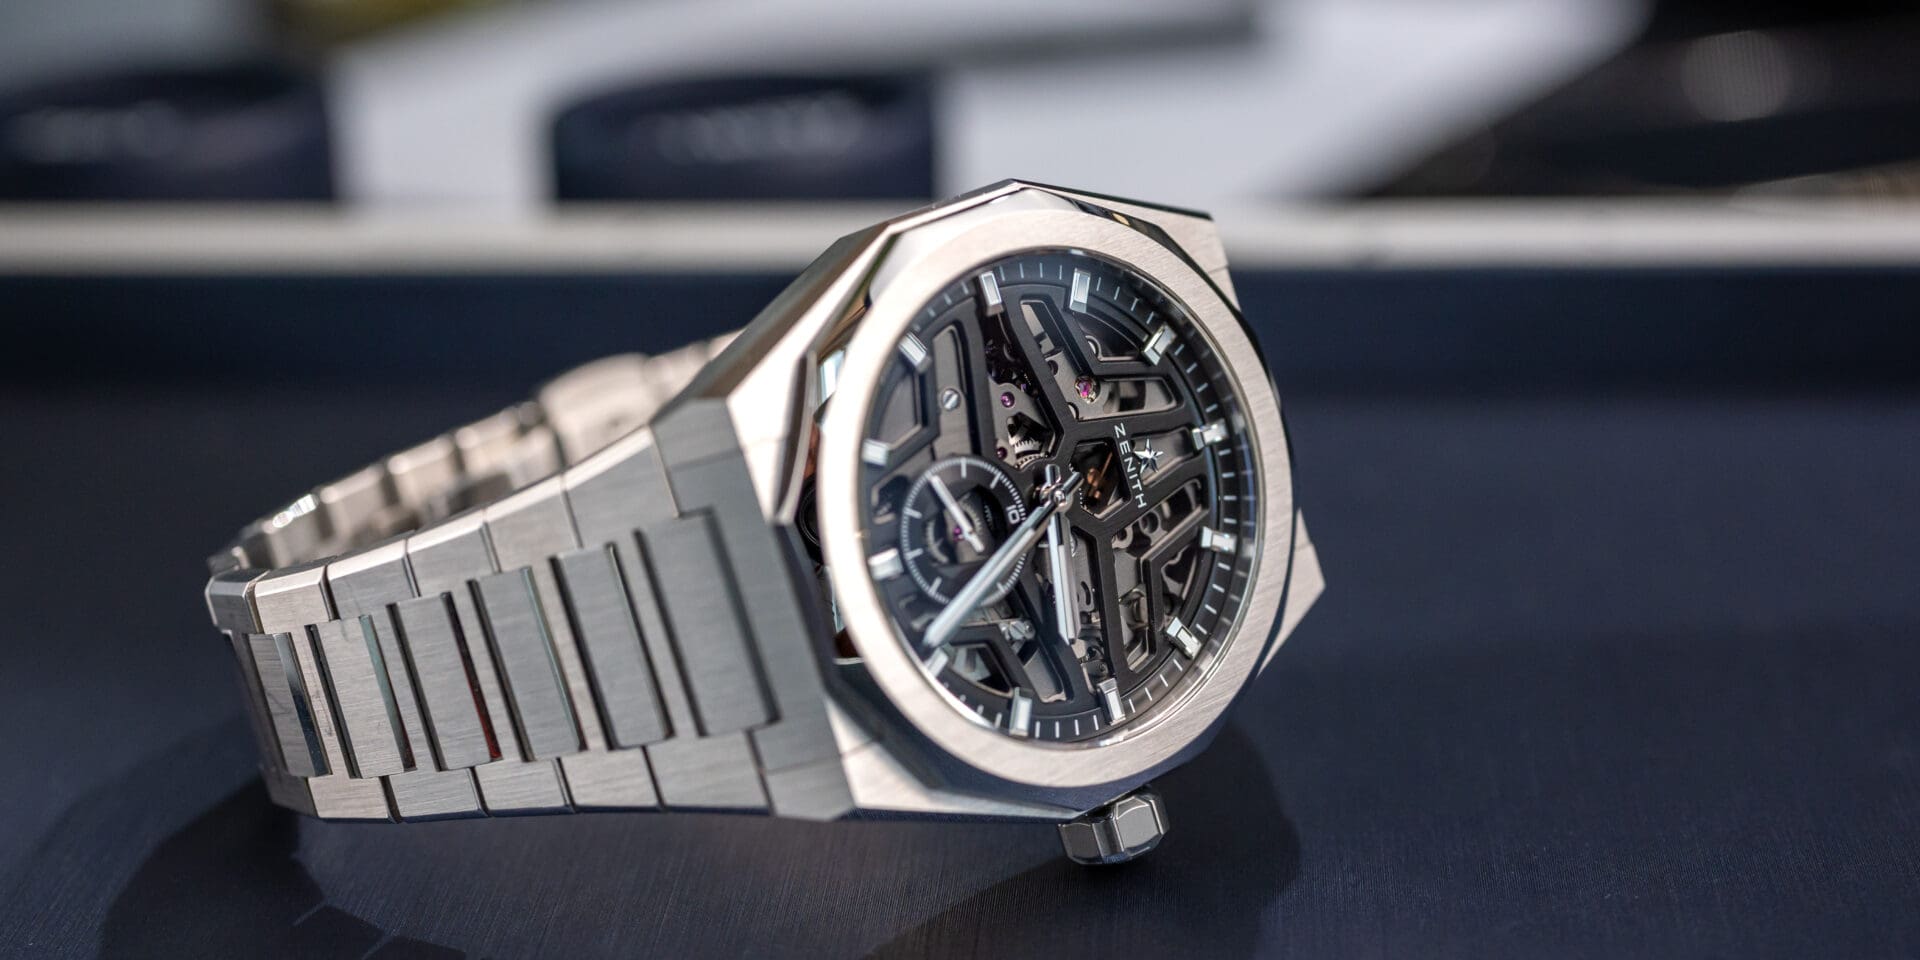 HANDS-ON: The new Zenith Defy Skyline Skeleton is a superstar in their 2023 lineup